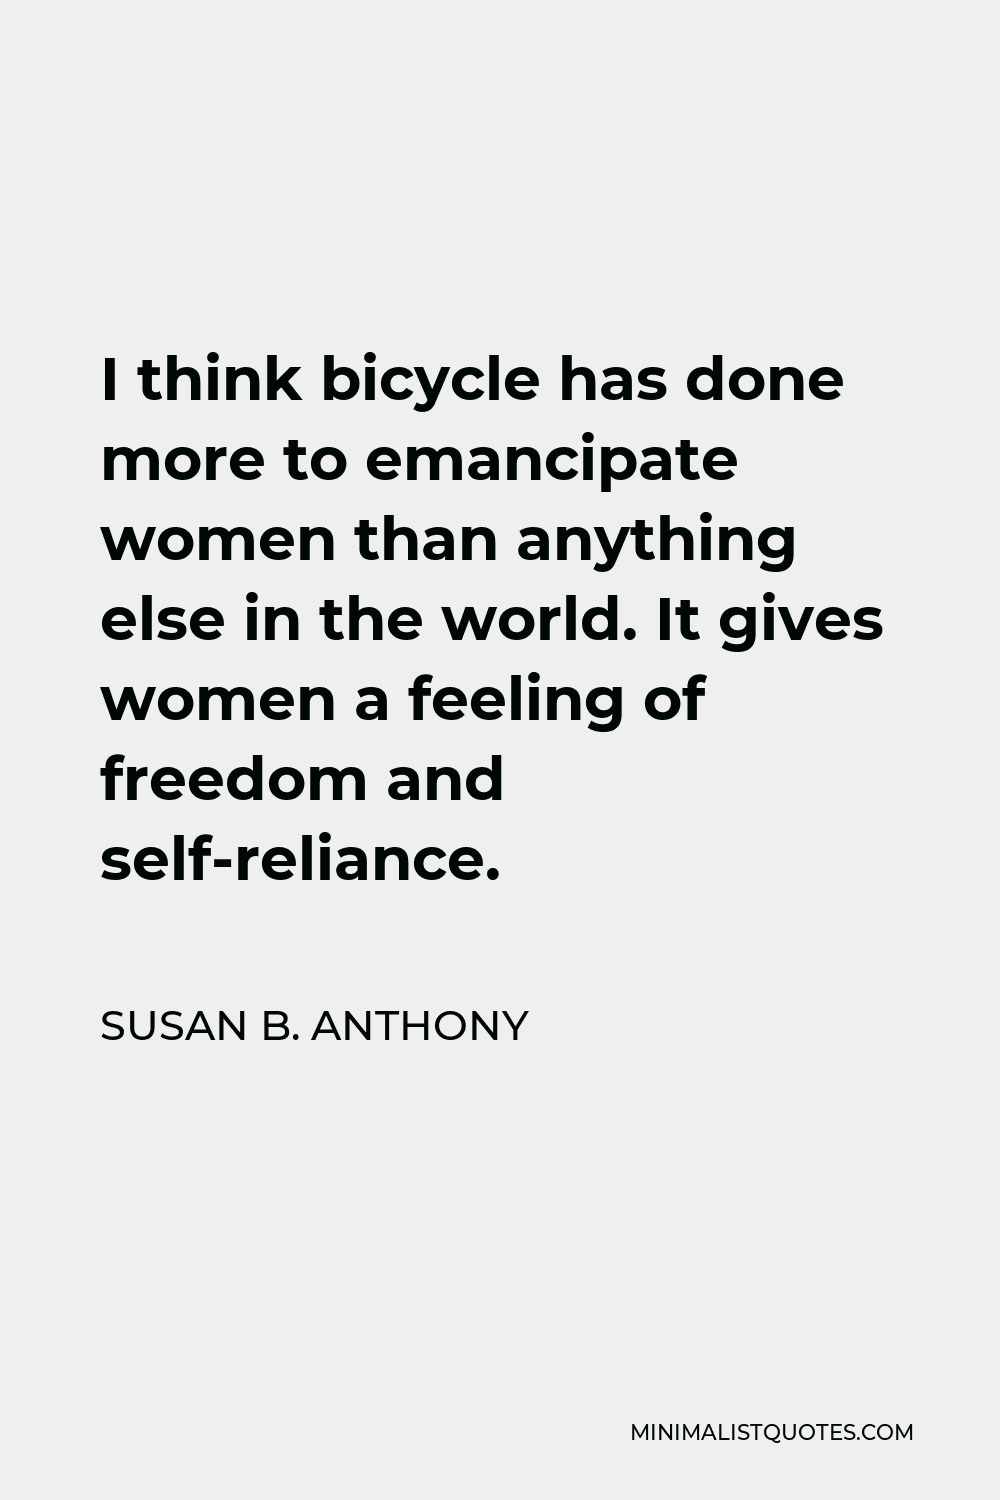 Susan B. Anthony Quote - I think bicycle has done more to emancipate women than anything else in the world. It gives women a feeling of freedom and self-reliance.